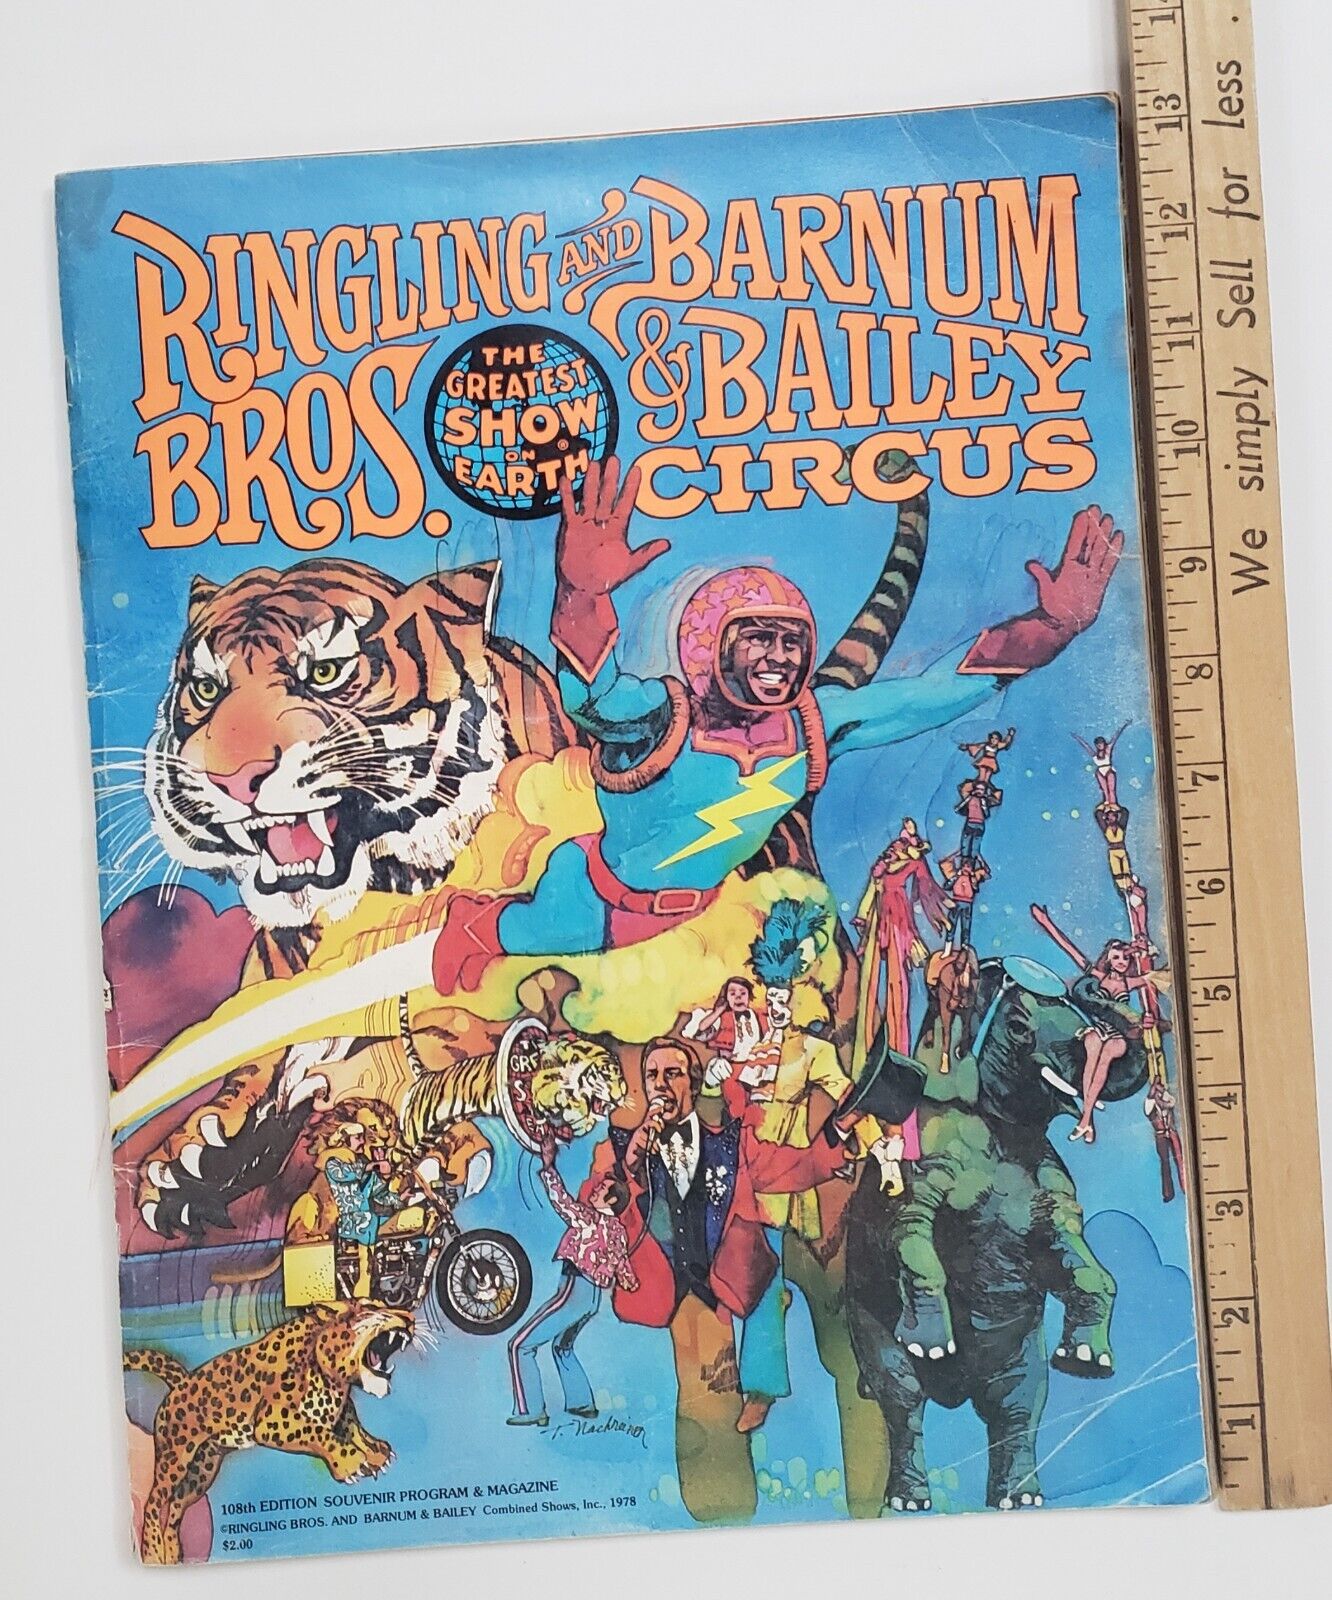 Vintage Circus Ringling Brothers Barnum Bailey Magazine Program 1978 with Poster